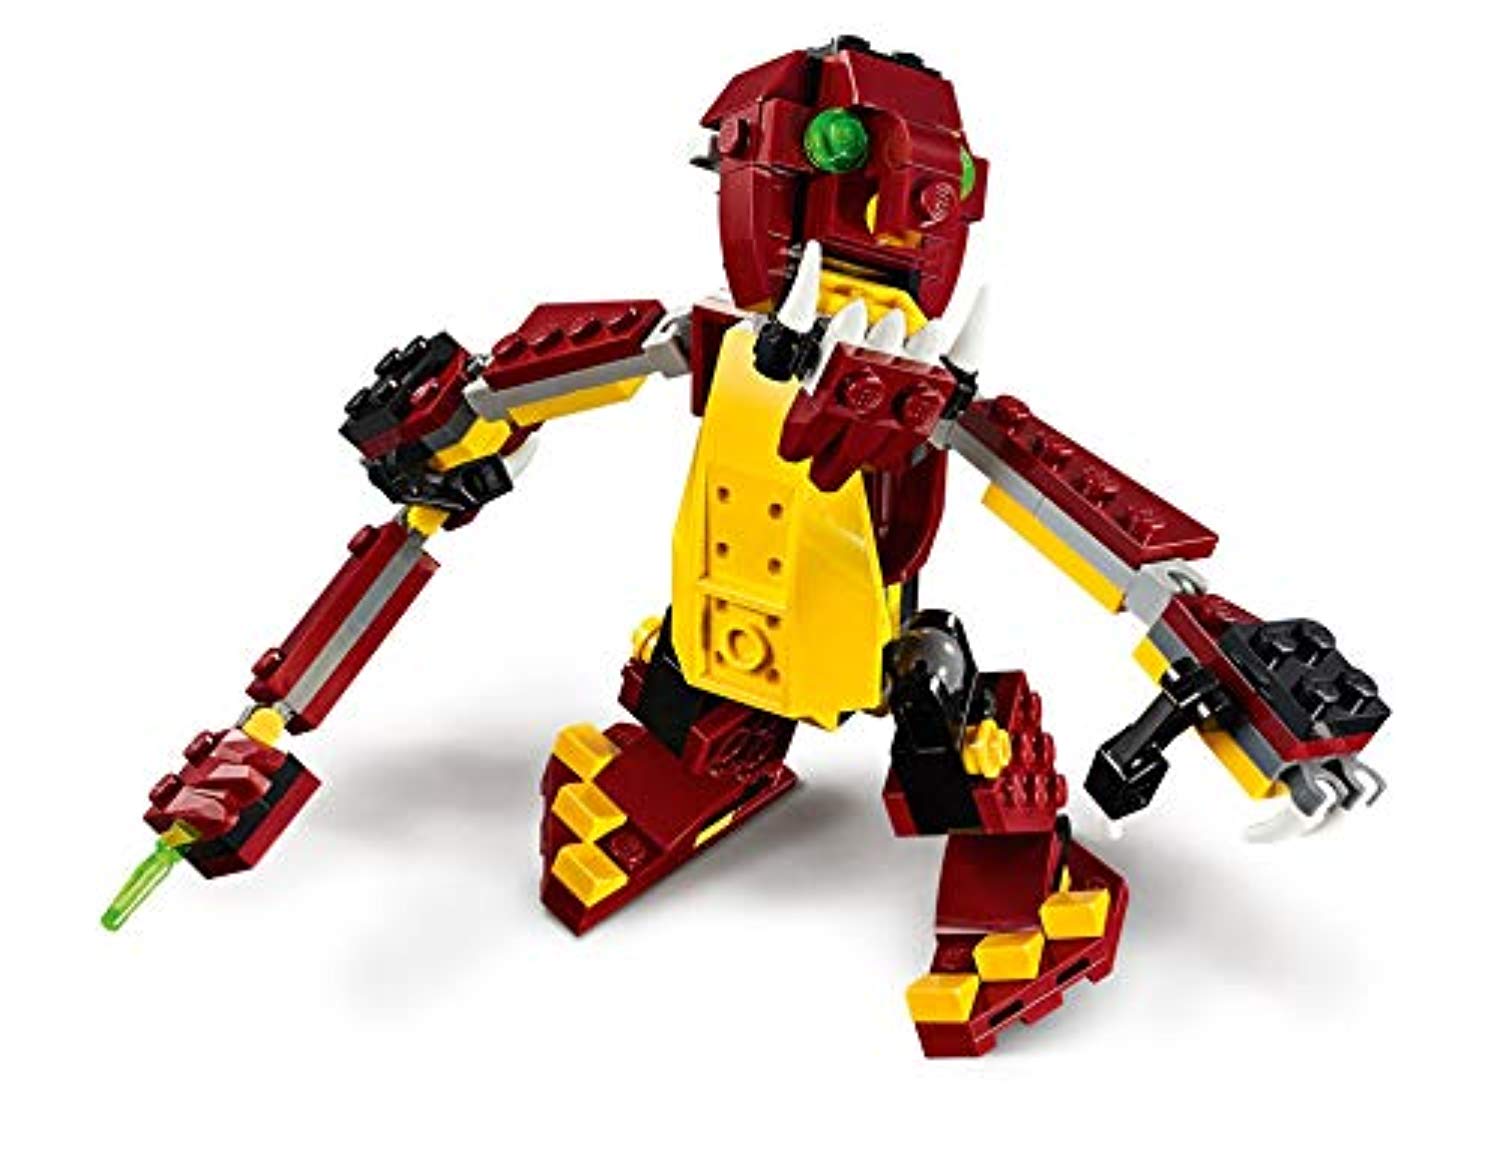 LEGO 31073 Creator 3in1 Mythical Creatures Dragon, Giant Spider and Troll Action Figures Model Building Set, Toys for Kids 7-12 Years Old - Offer Games